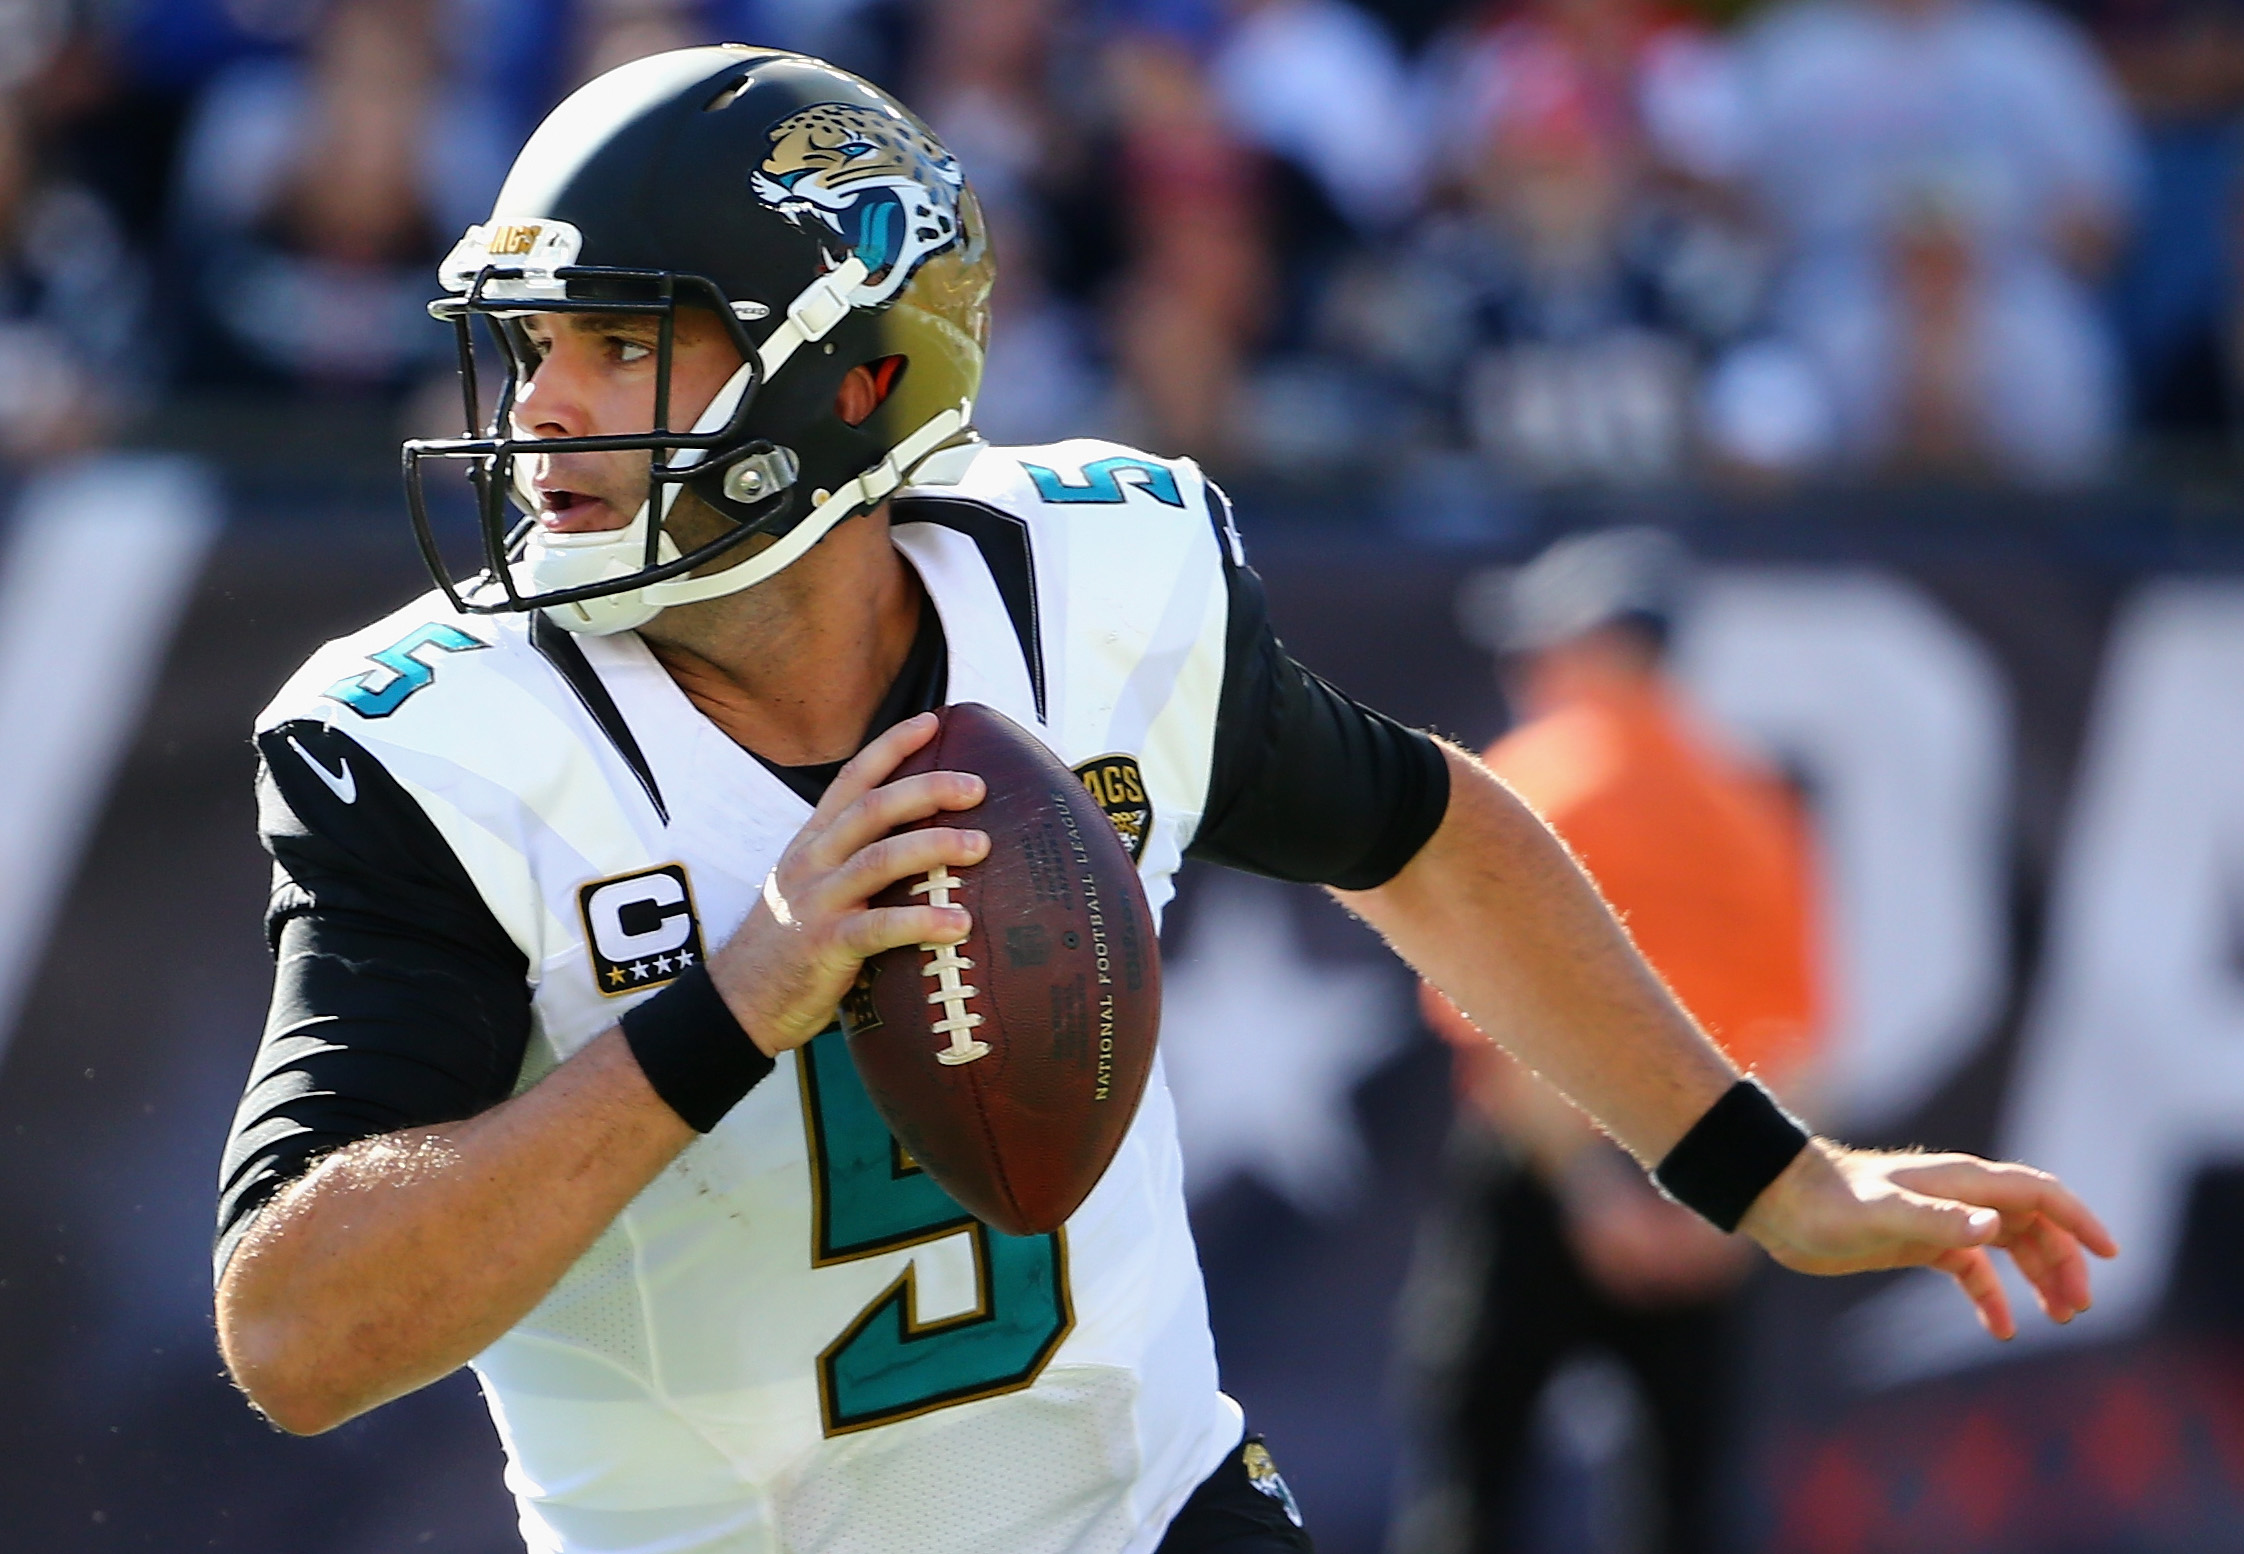 Blake Bortles looked helpless as the Jaguars were thrashed by the Patriots last week (Getty).